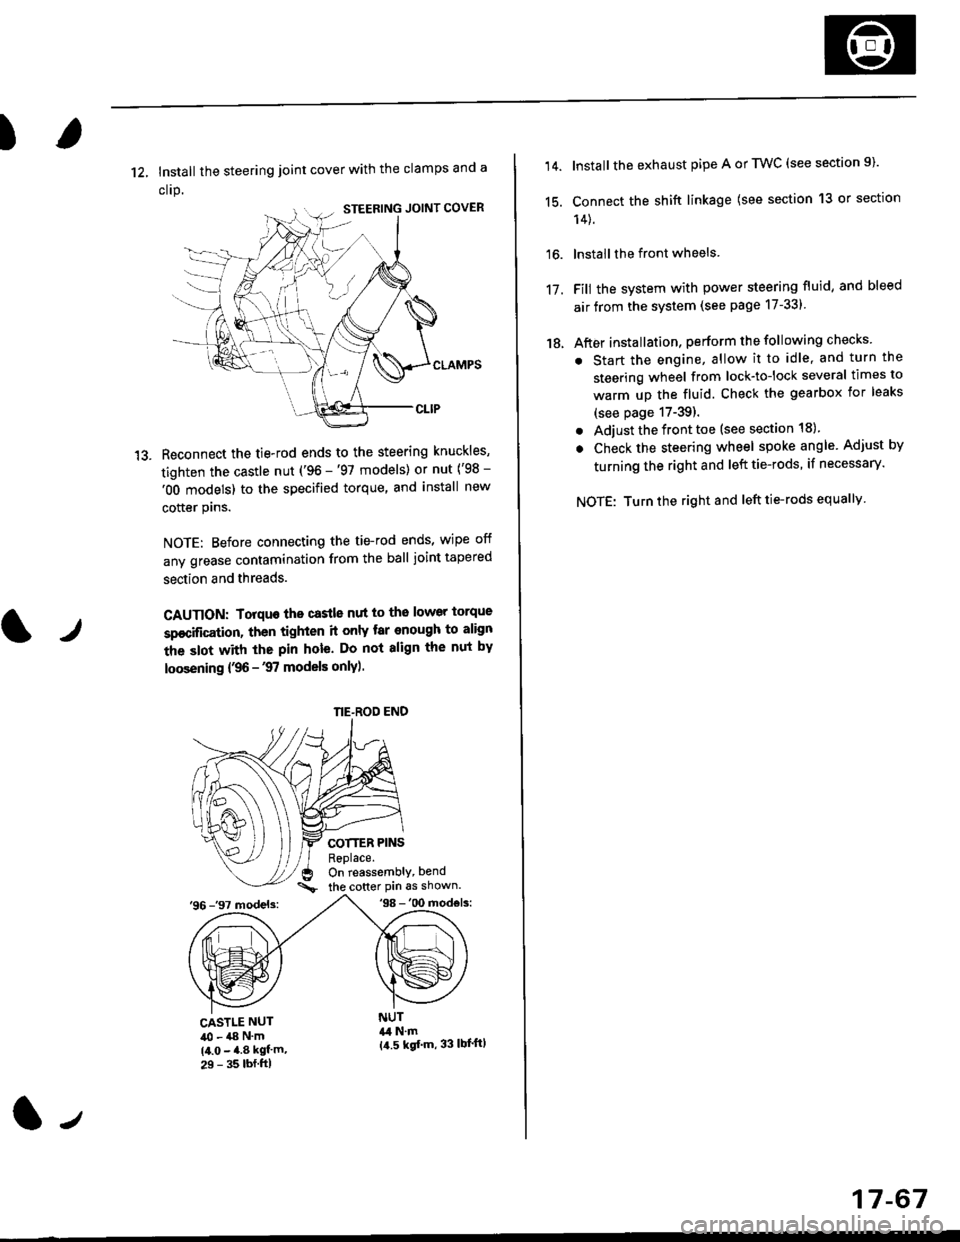 HONDA CIVIC 1998 6.G Service Manual )
1?
12, Install the steering joint cover with the clamps and a
clrp.
Reconnect the tie-rod ends to the steering knuckles,
tighten the castle nut (96 -97 models) or nut (98 -
OO models) to the spe